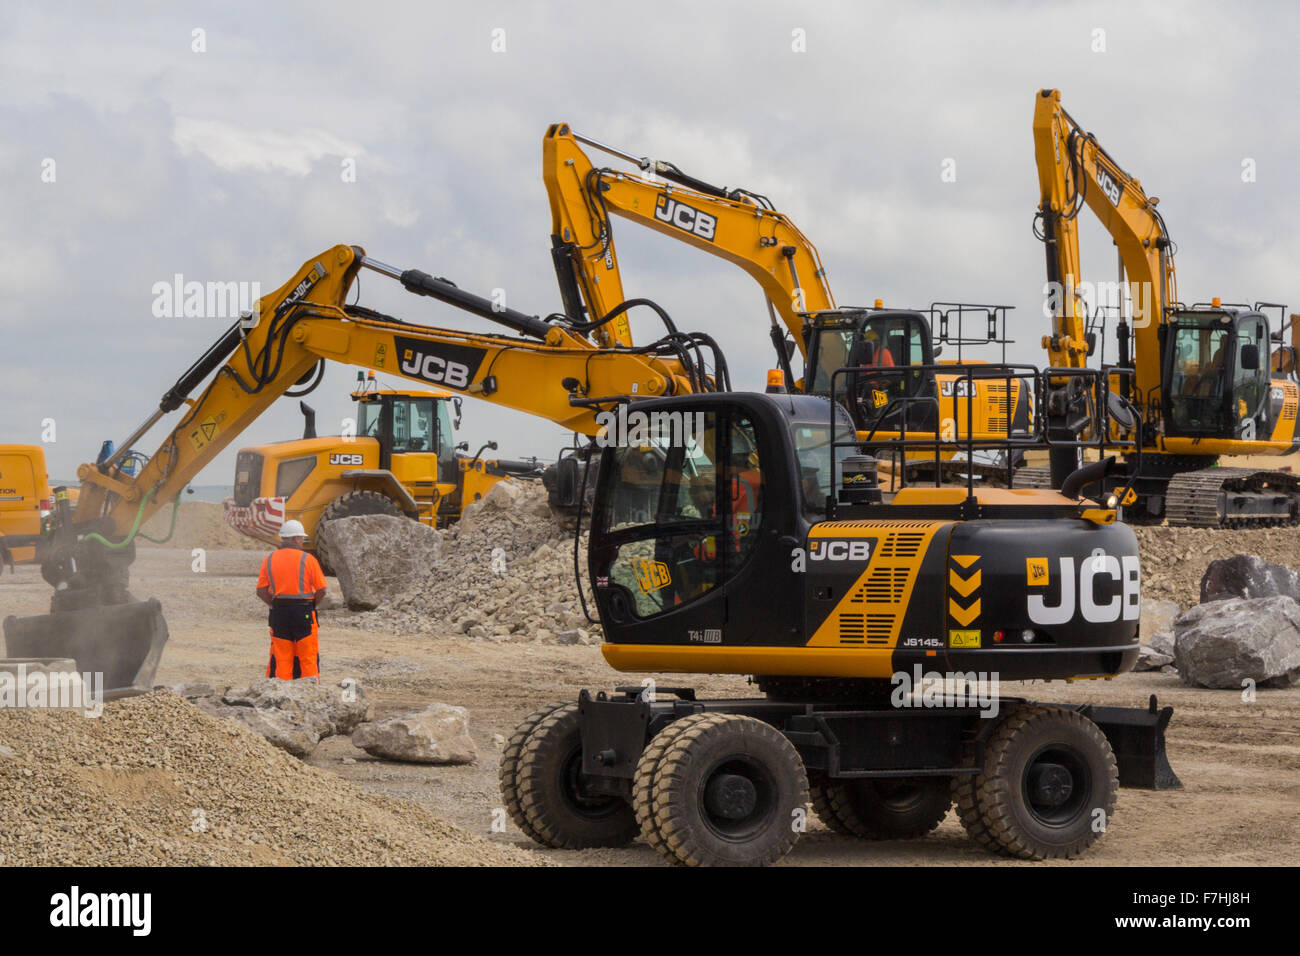 JCB Excavators and loaders on demonstration at Hillhead Quarrying Recycling and Construction exhibition 2014 Stock Photo